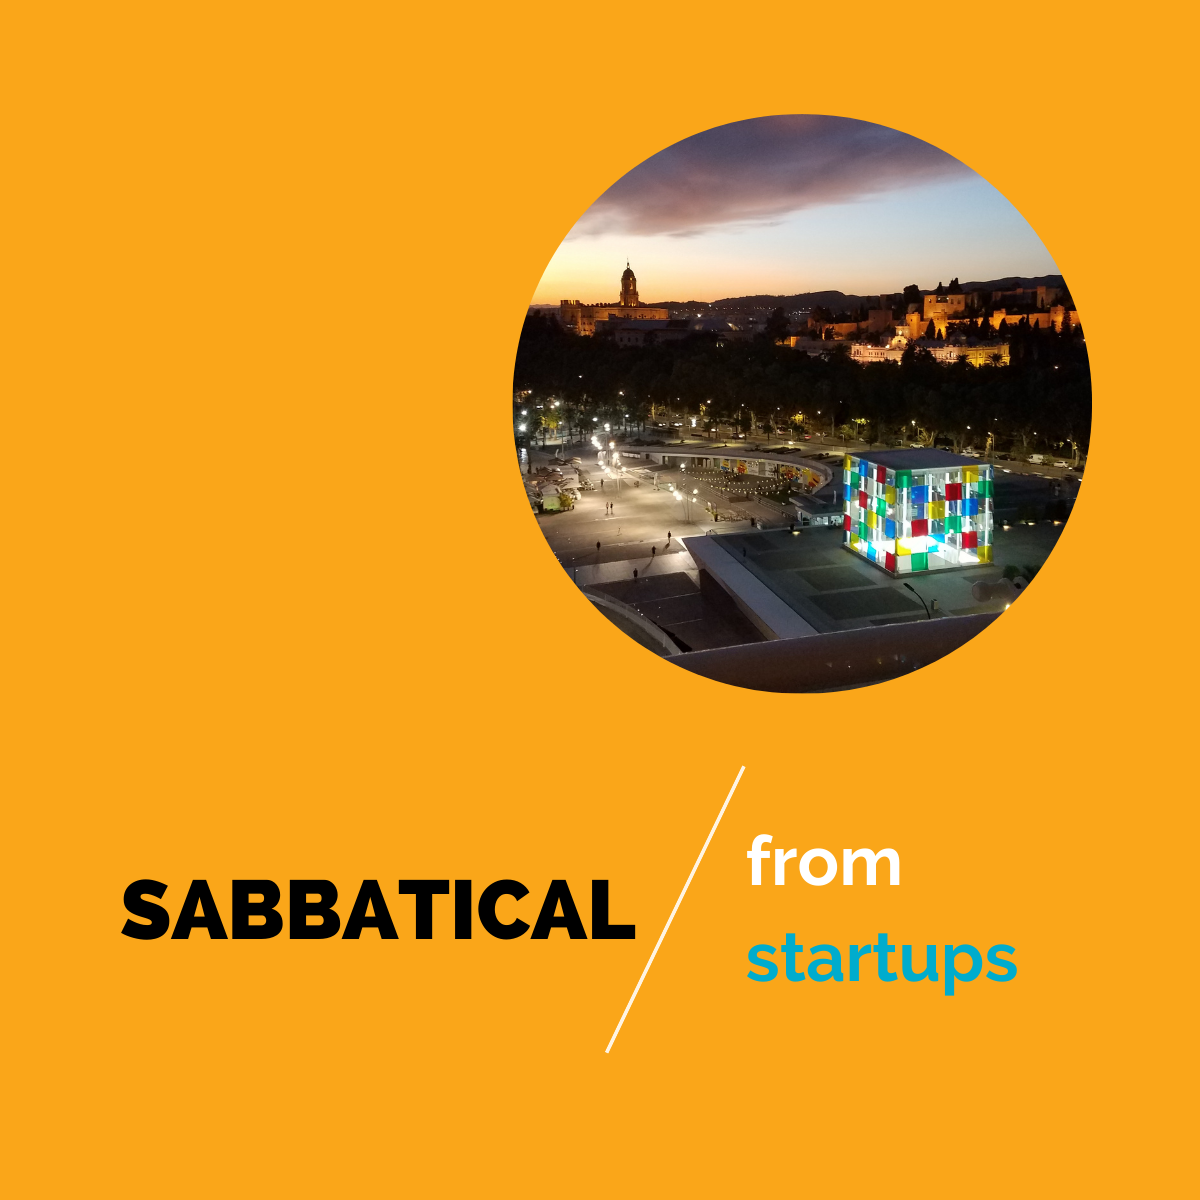 Photo of Malaga, Spain at night with caption of "Sabbatical from startups"